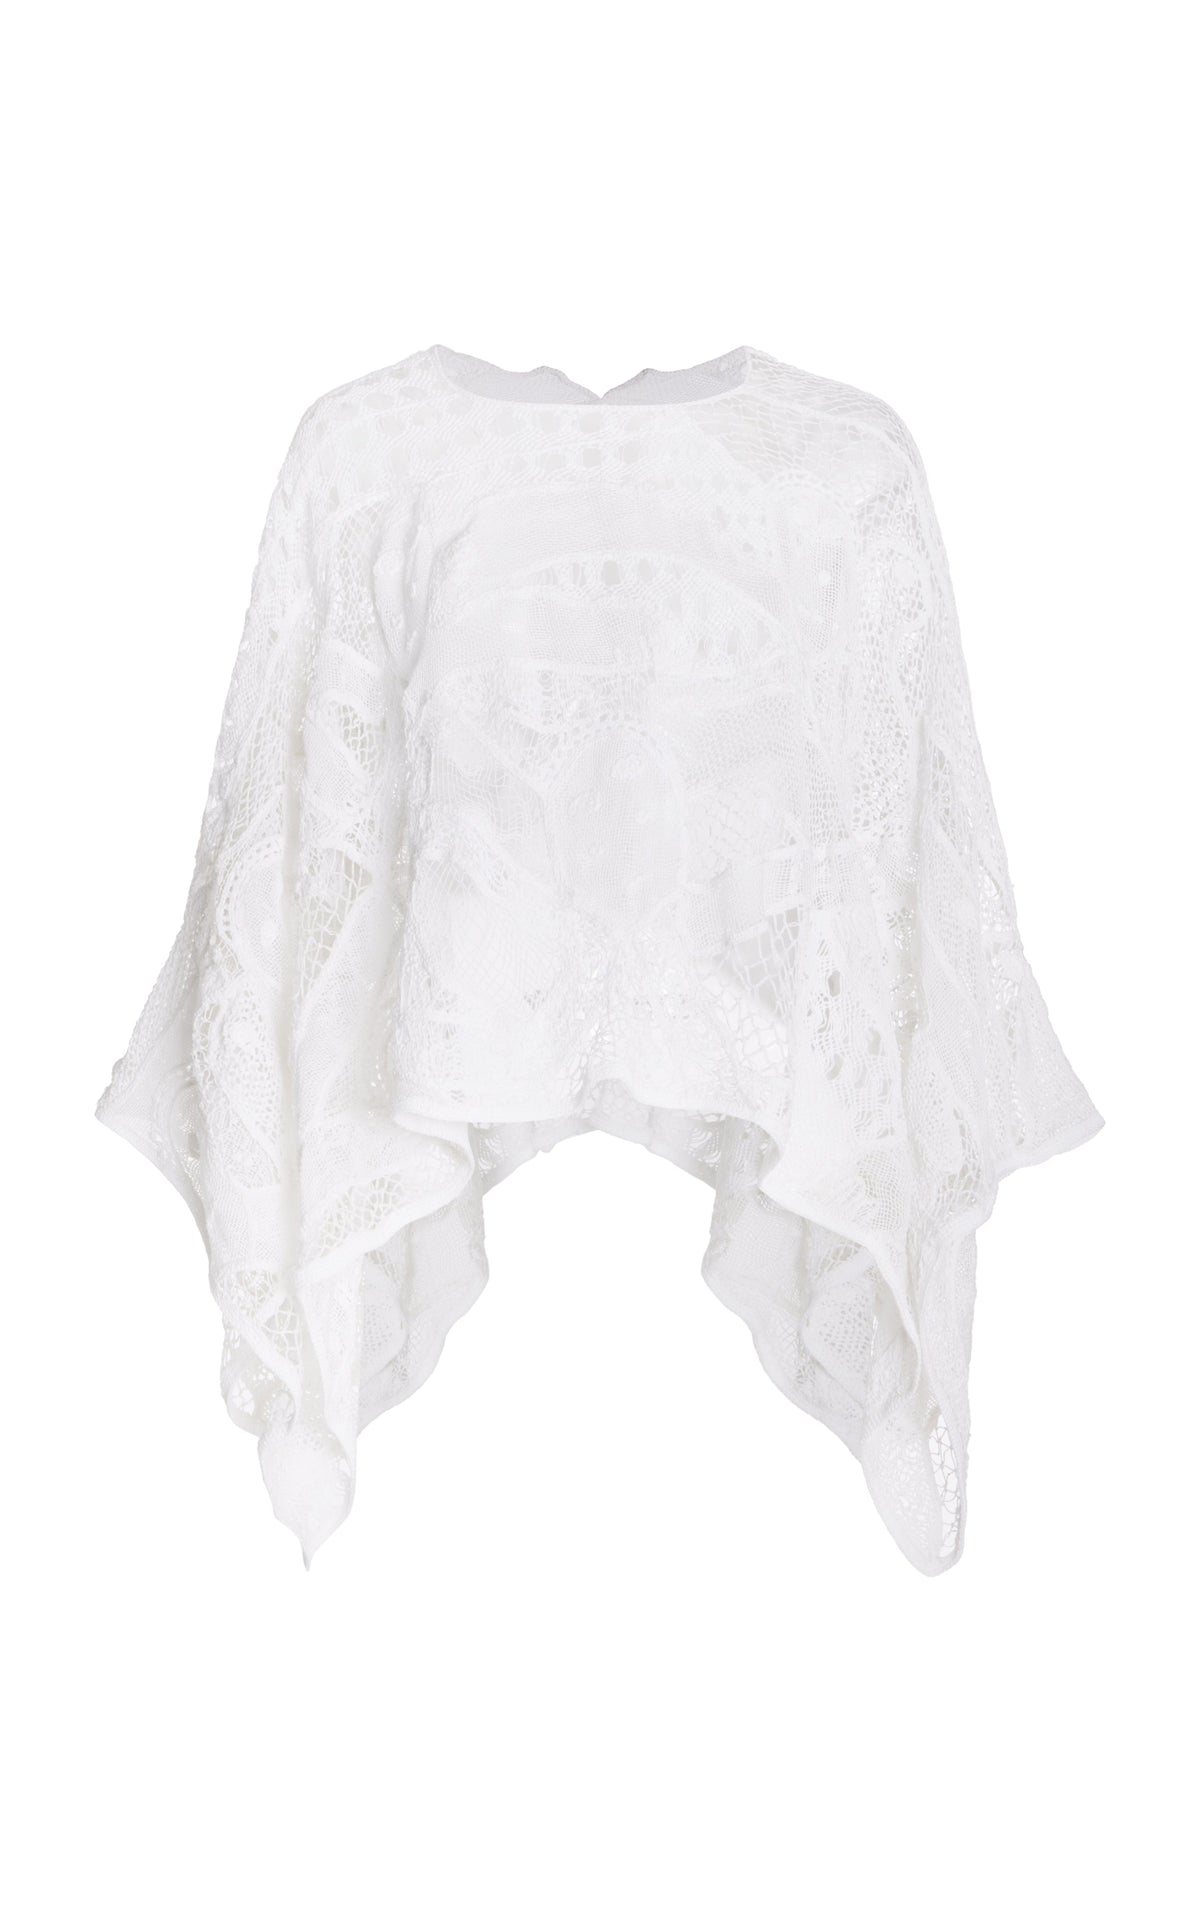 Acrion Crochet Poncho in White Cotton